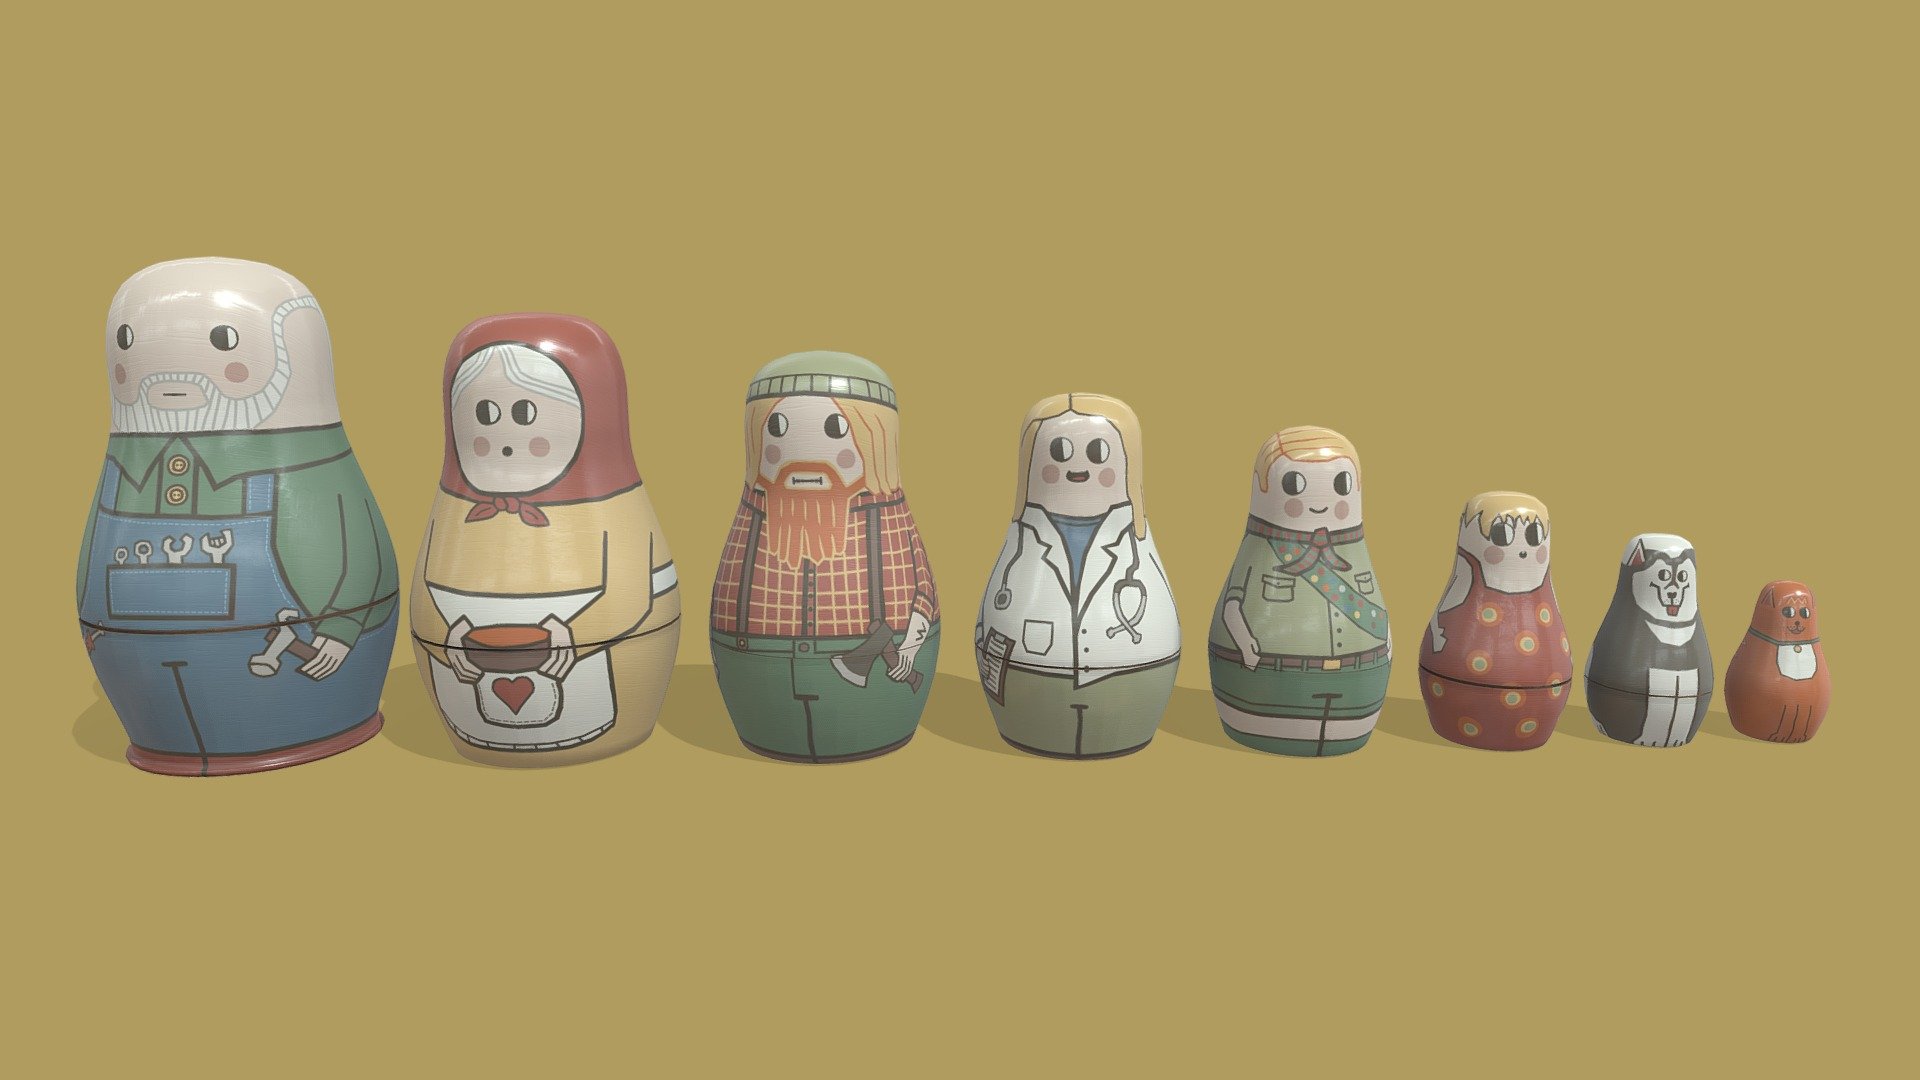 Three generations of nesting dolls, Grandparents, adults, children and also some pets for fun.

This version is for viewing in AR so you can place them on your own shelf :D

Now with sound!! 

My aim was to create Scandinavian style dolls with a modern twist. I drew them all within Substance Painter and stuck to a strict colour palate.

Originaly Modelled in Blender and textured in Substance Painter for #GenerationsChallenge - Nesting Dolls (Animated) - AR version - Buy Royalty Free 3D model by AndyBegg 3d model